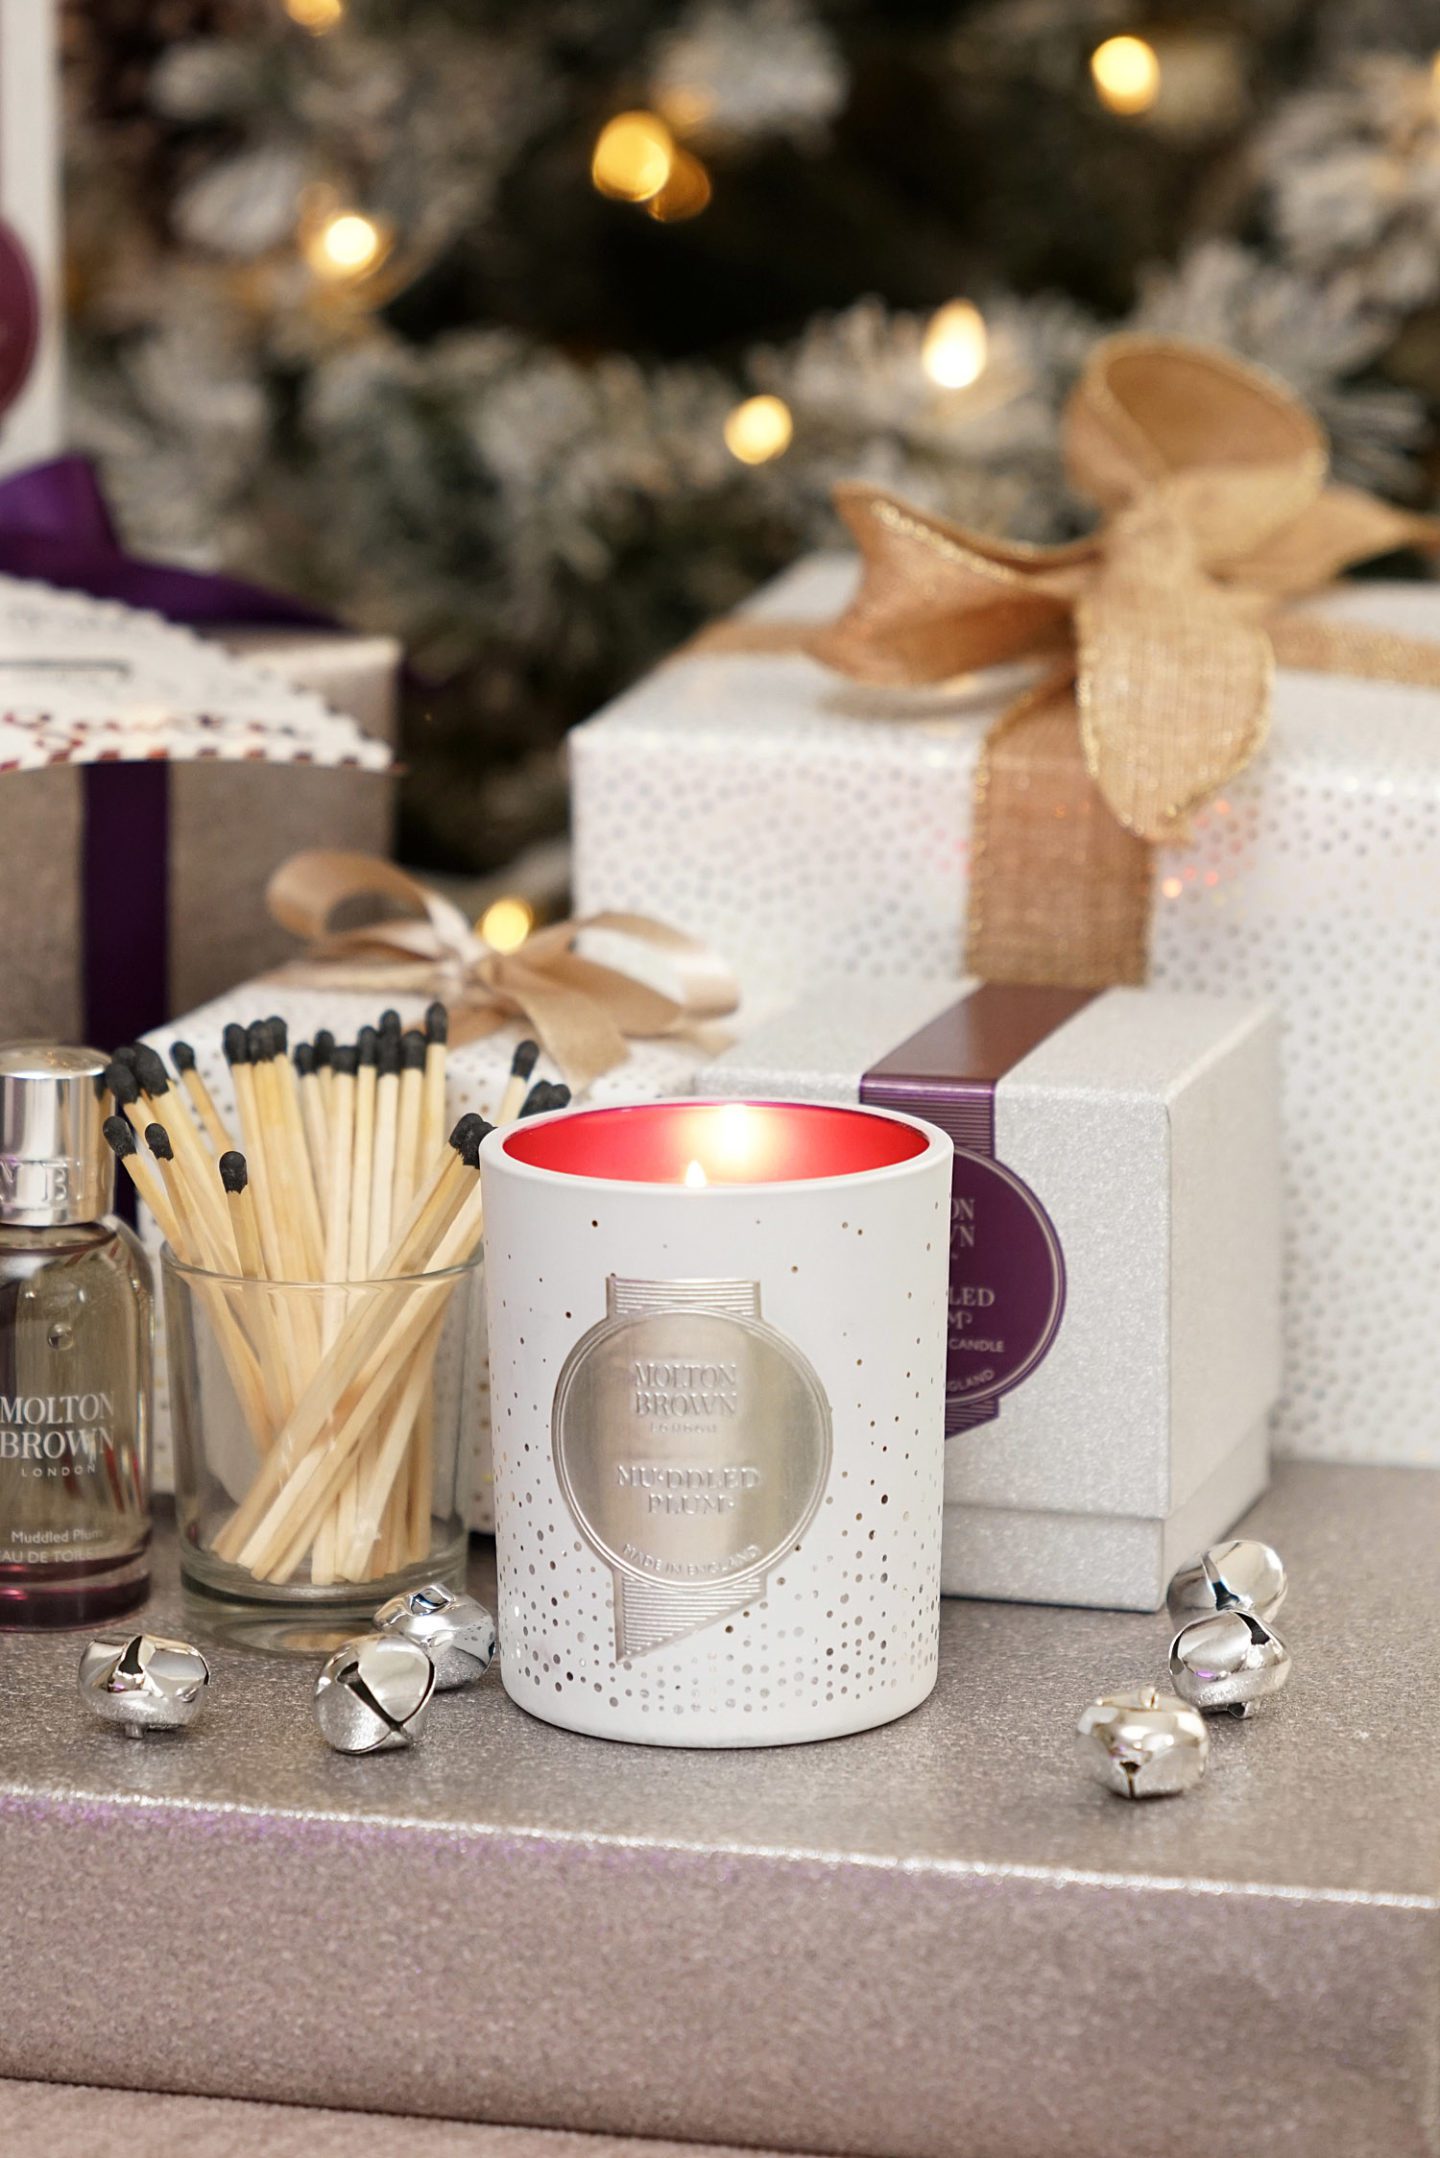 Molton Brown Holiday Muddled Plum Candle